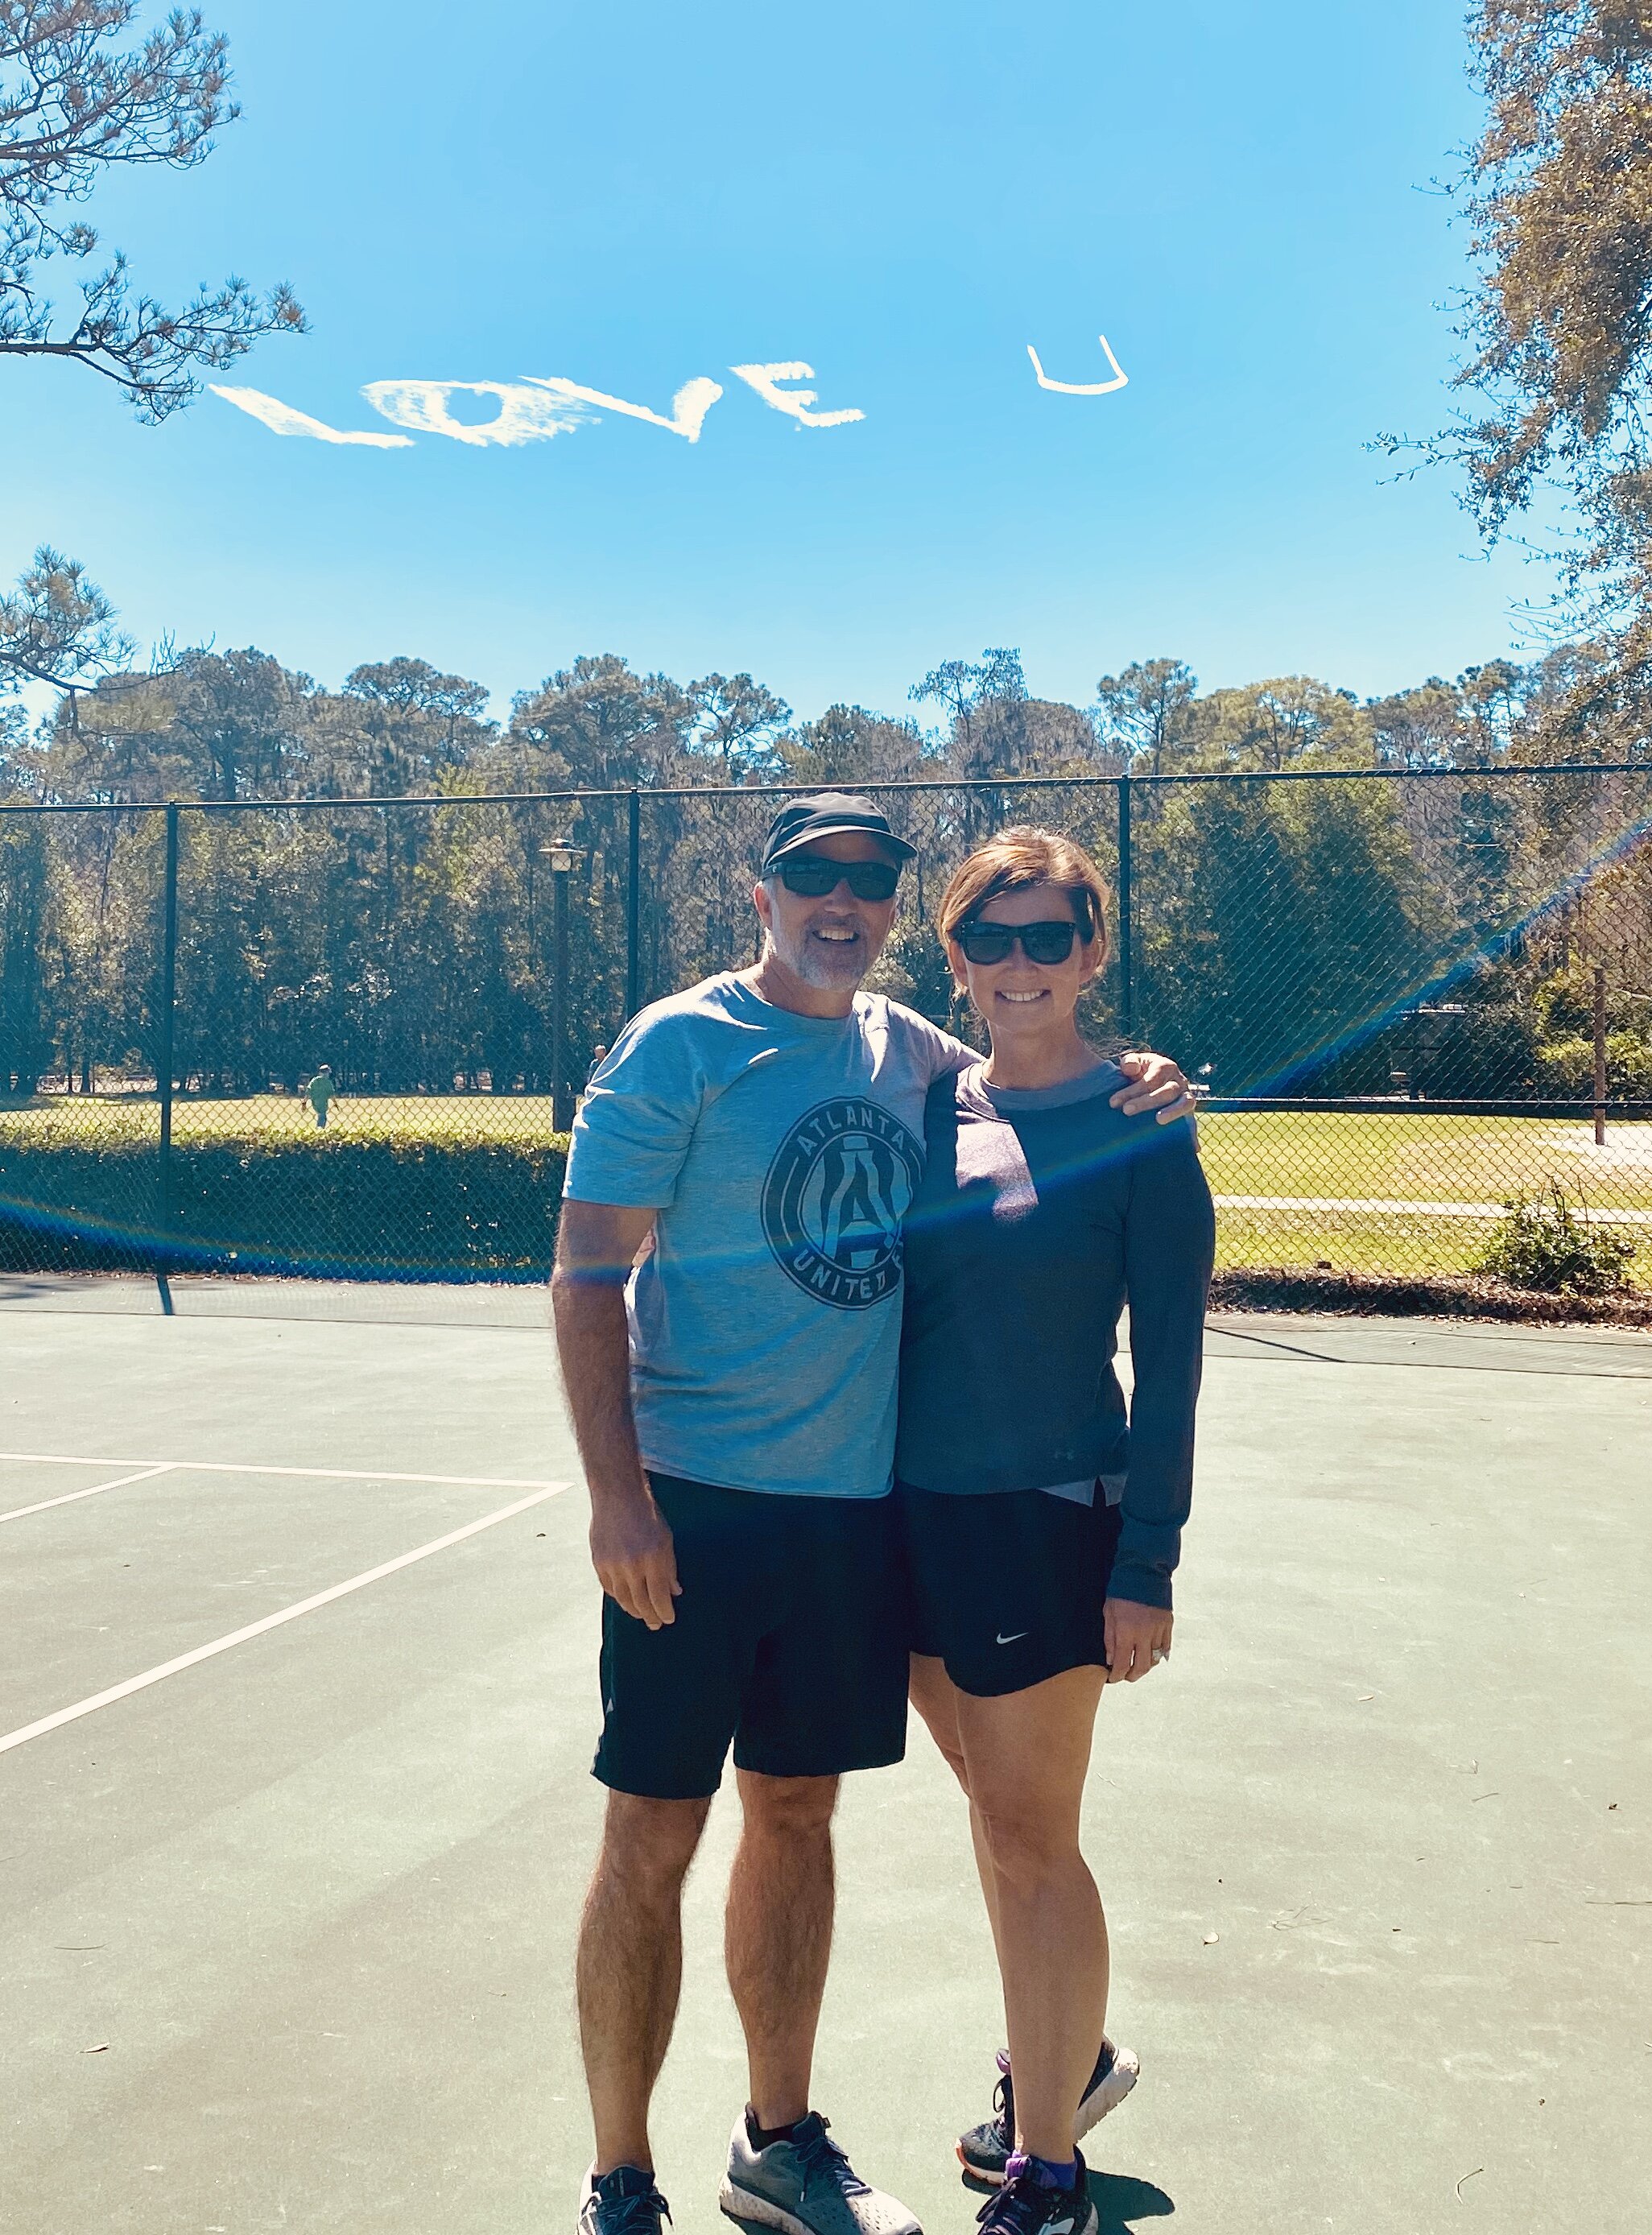  The four of us love playing pickle ball. As we started to play, a plane began to write in the sky. We thought it may be the beginning of a marriage proposal, but the finished product said, “Love U Jesus”, “Thank U Jesus” and finally, “Praise U Jesus